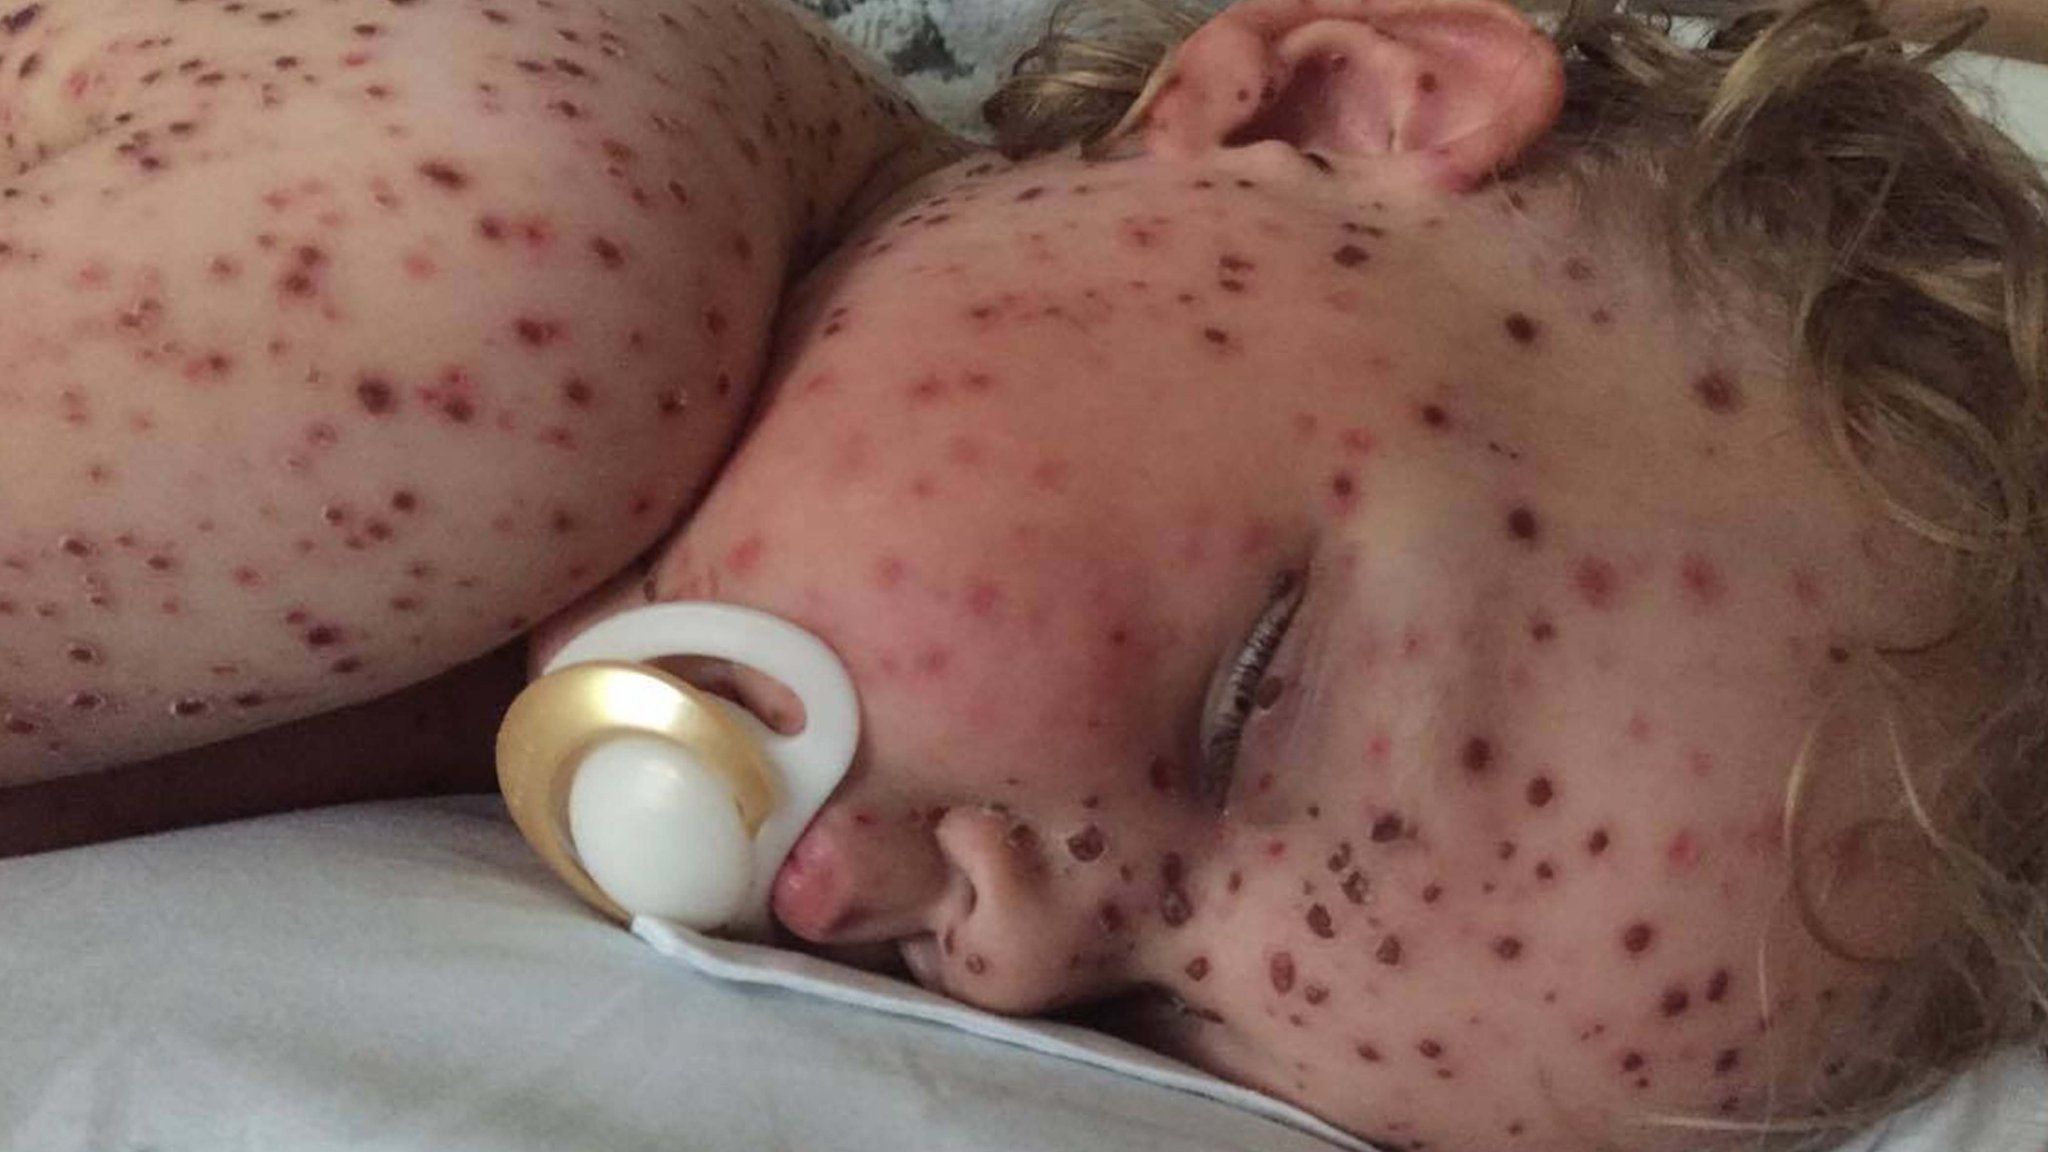 Two-year-old Jasper with chickenpox